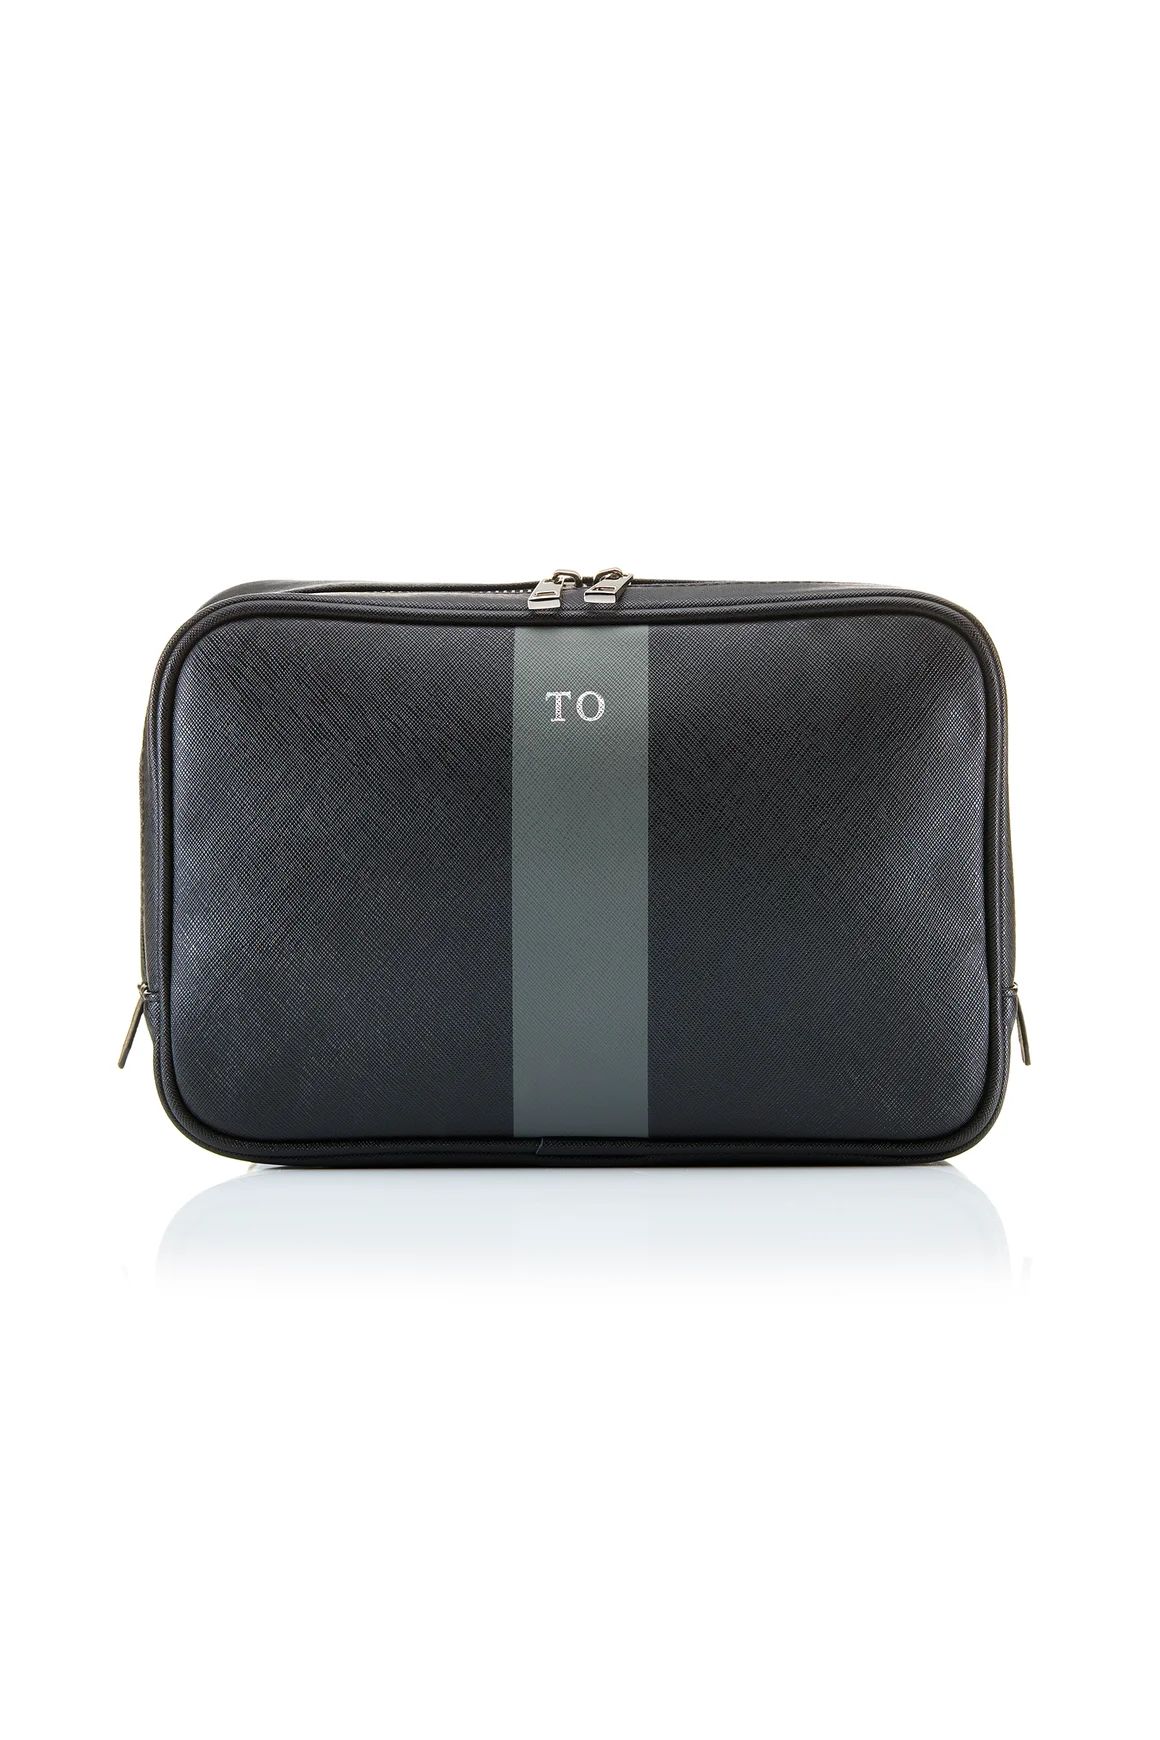 Personalised Leather Striped Wash Bag - Black Saffiano with Silver Hardware | HA Designs